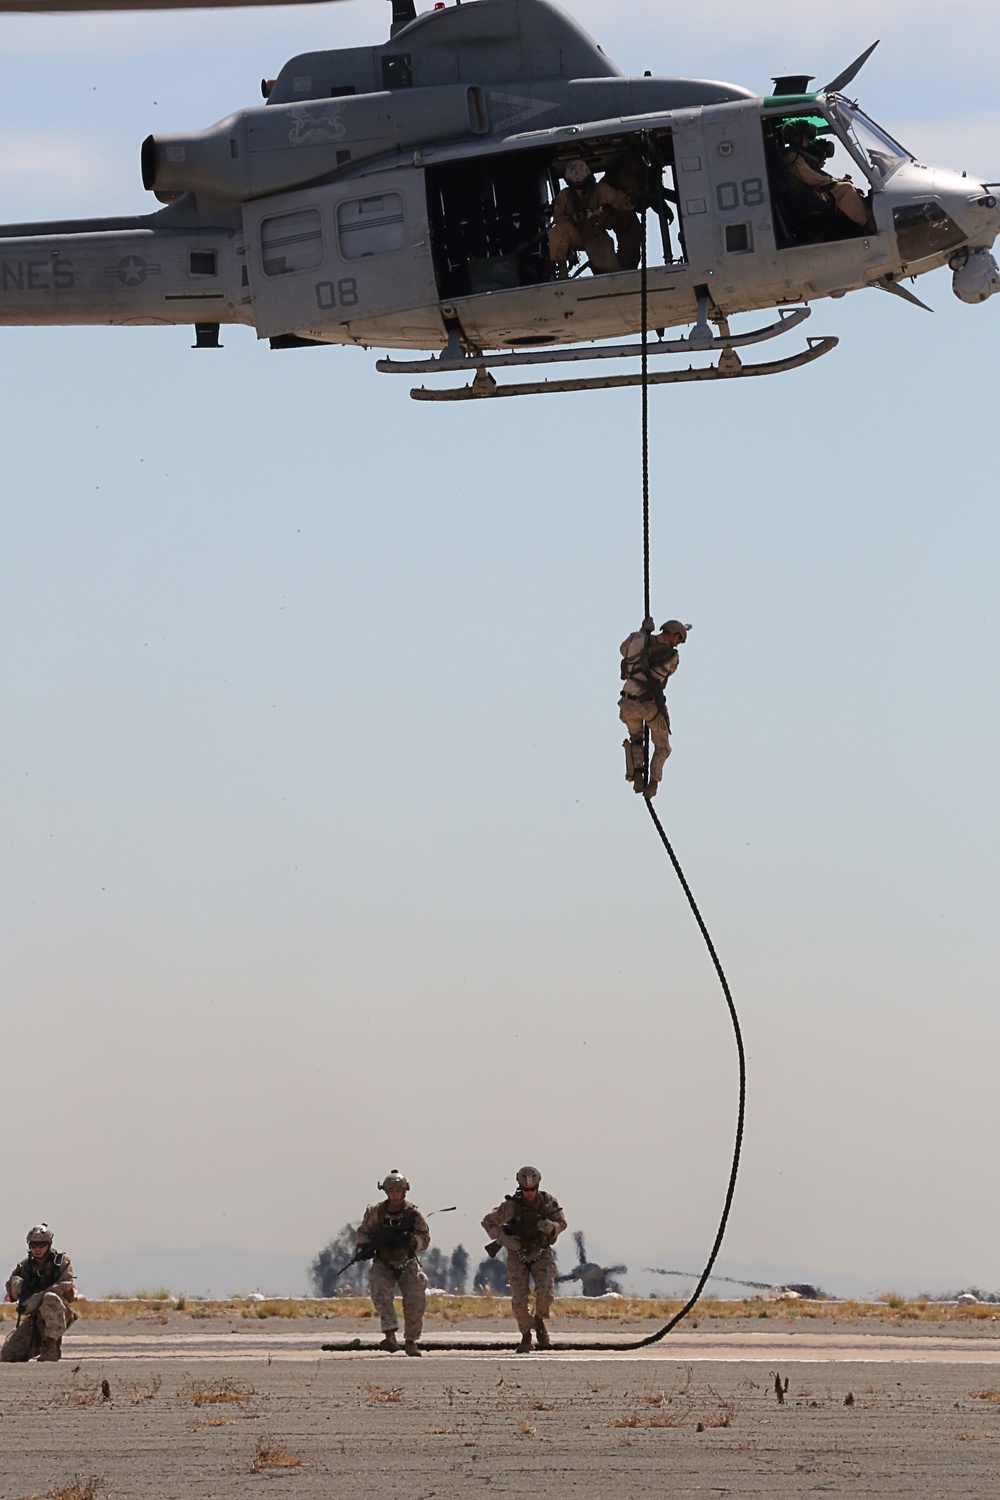 DVIDS - Images - Reconnaissance Marines Fast Rope from UH-1Y Helicopter  [Image 3 of 7]